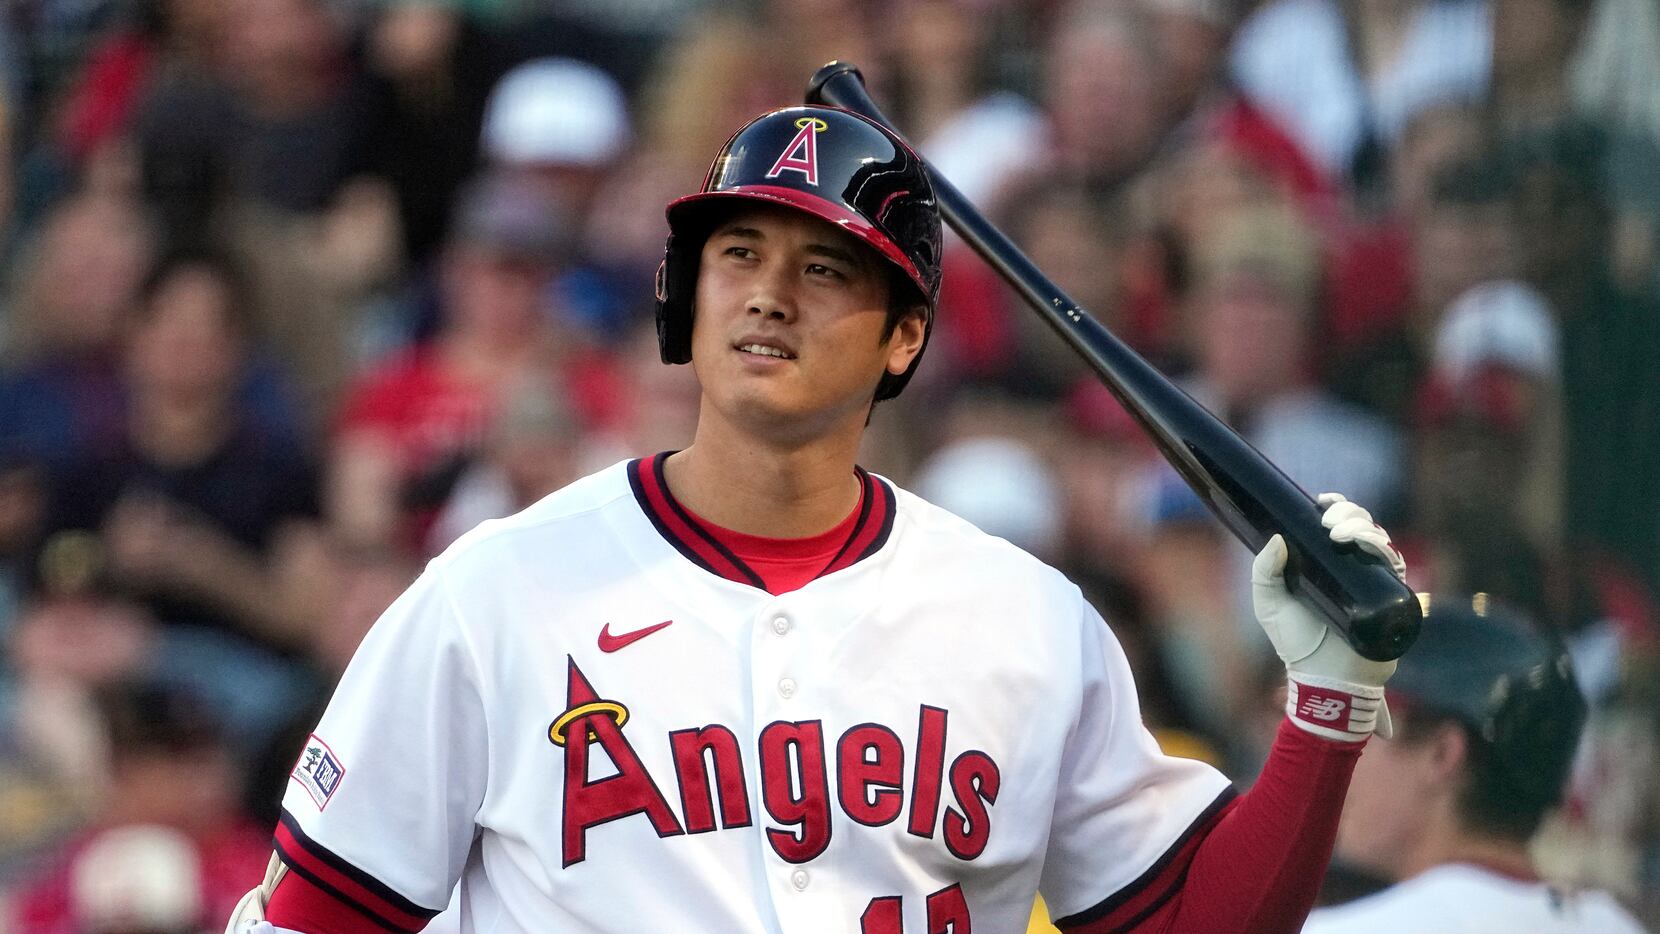 Shohei Ohtani thought ideal time for Angels to trade him was last